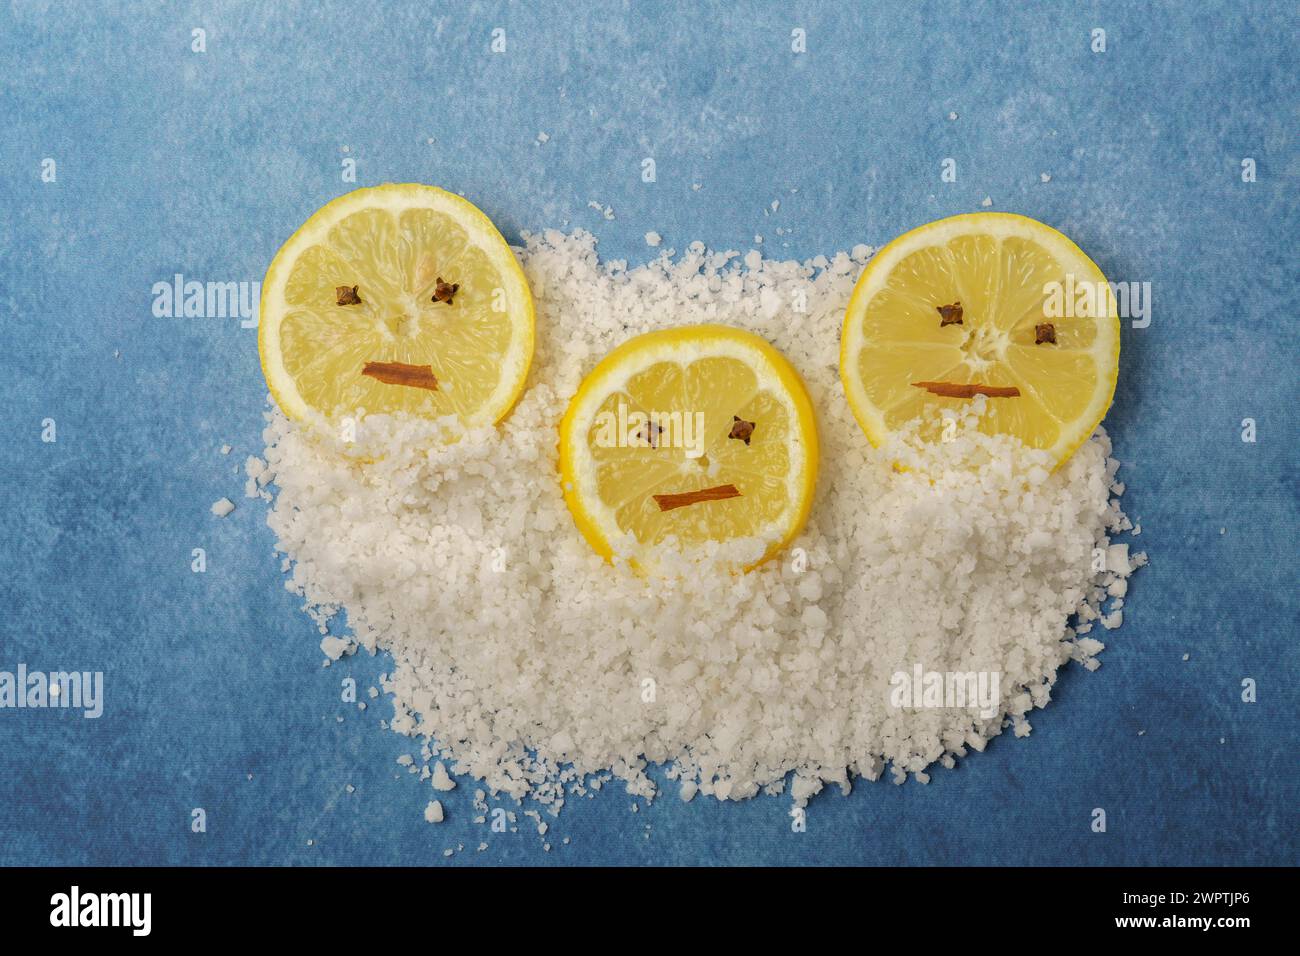 Lemon slices with cloves and cinnamon forming a smiley face on a pile of salt and blue background with copy space Stock Photo